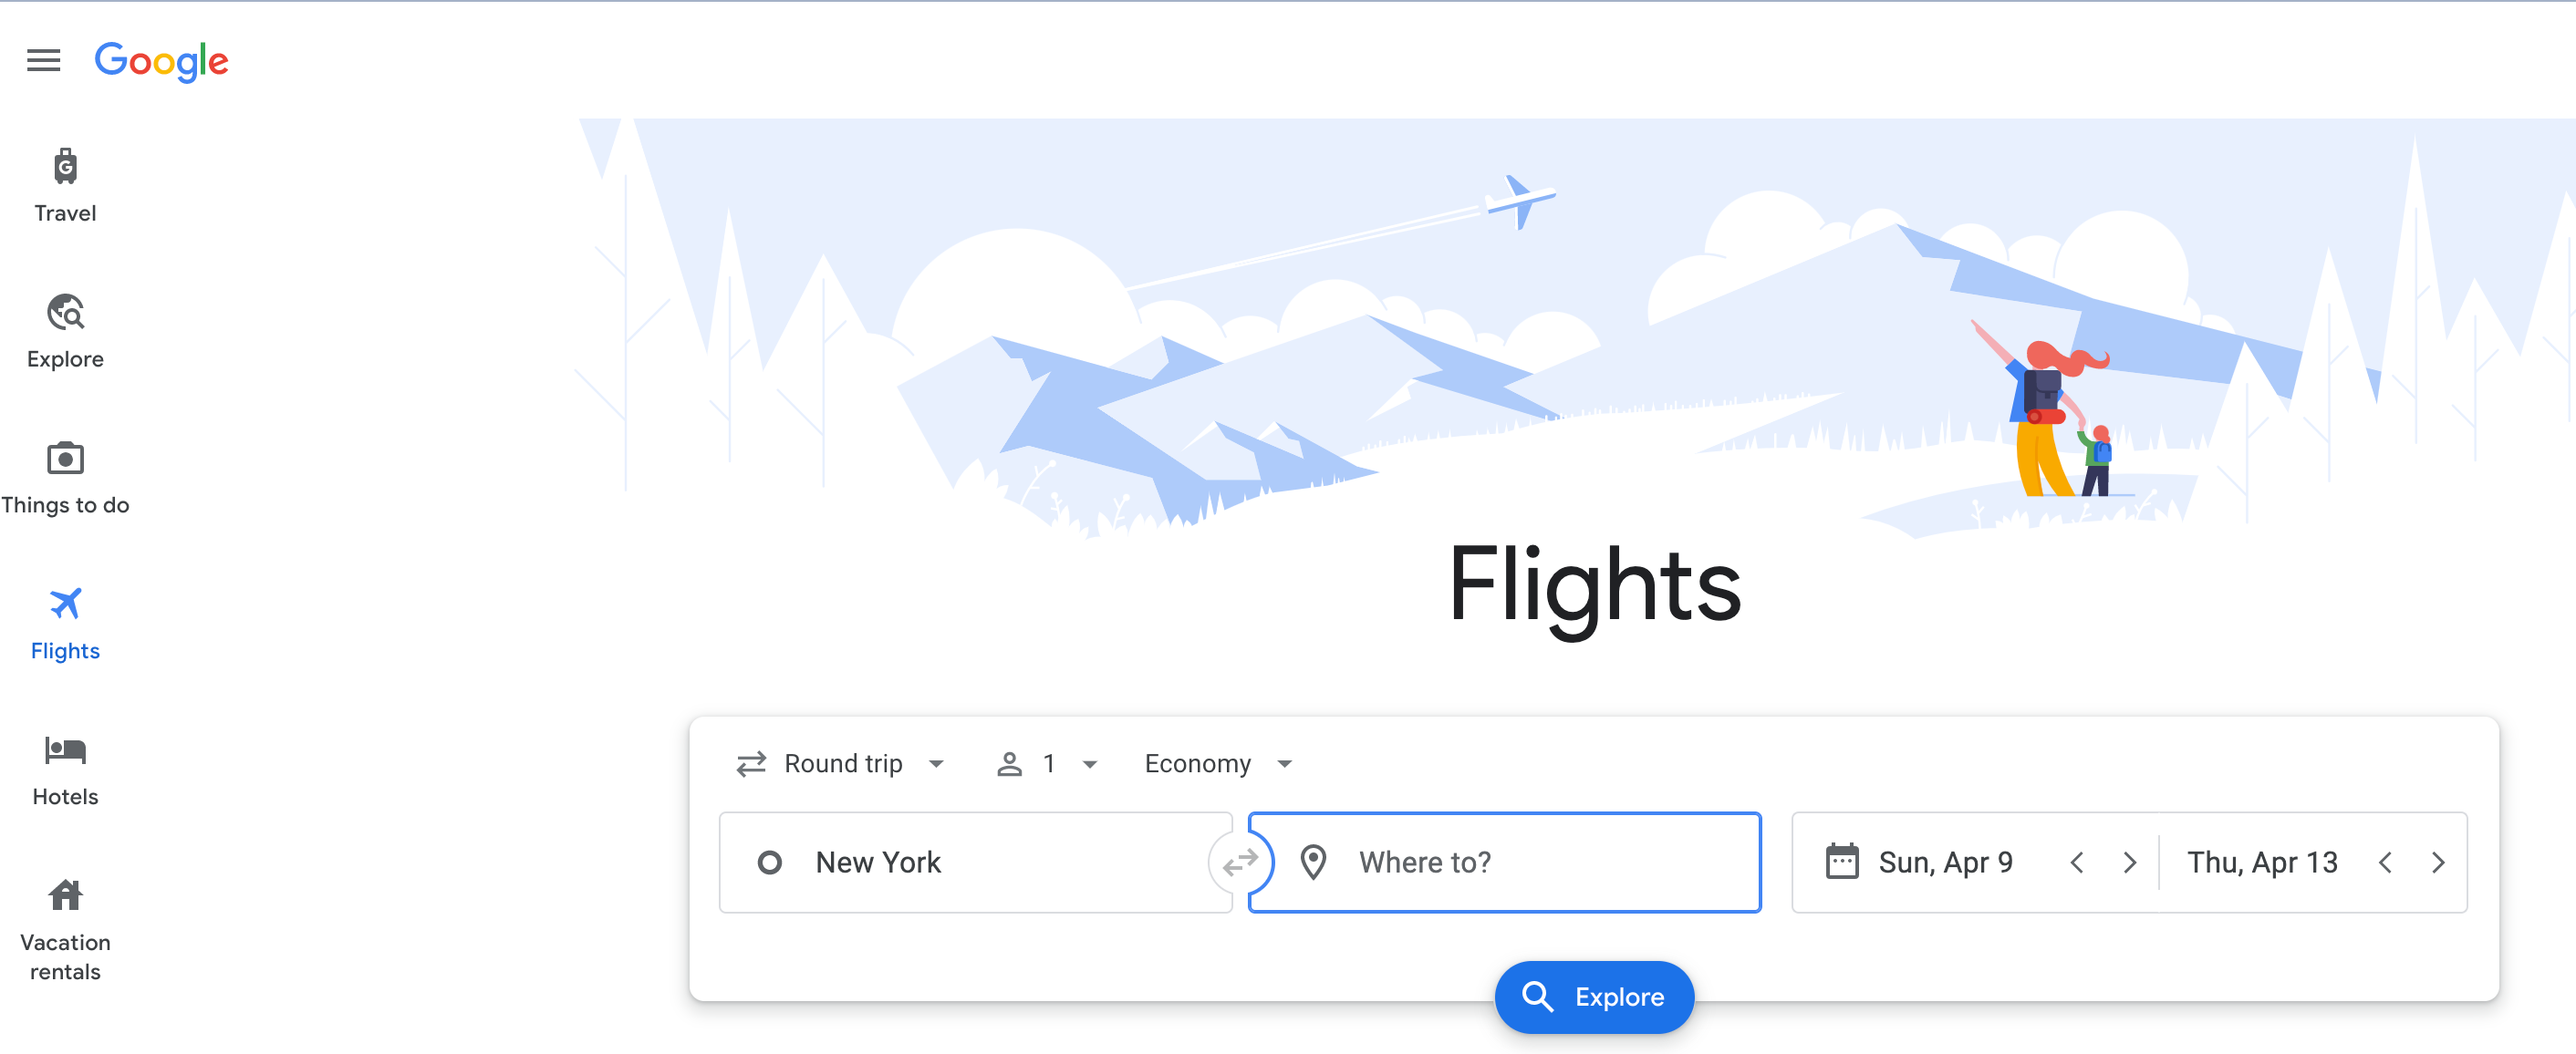 How to use Google Flights: A guide to finding flight deals